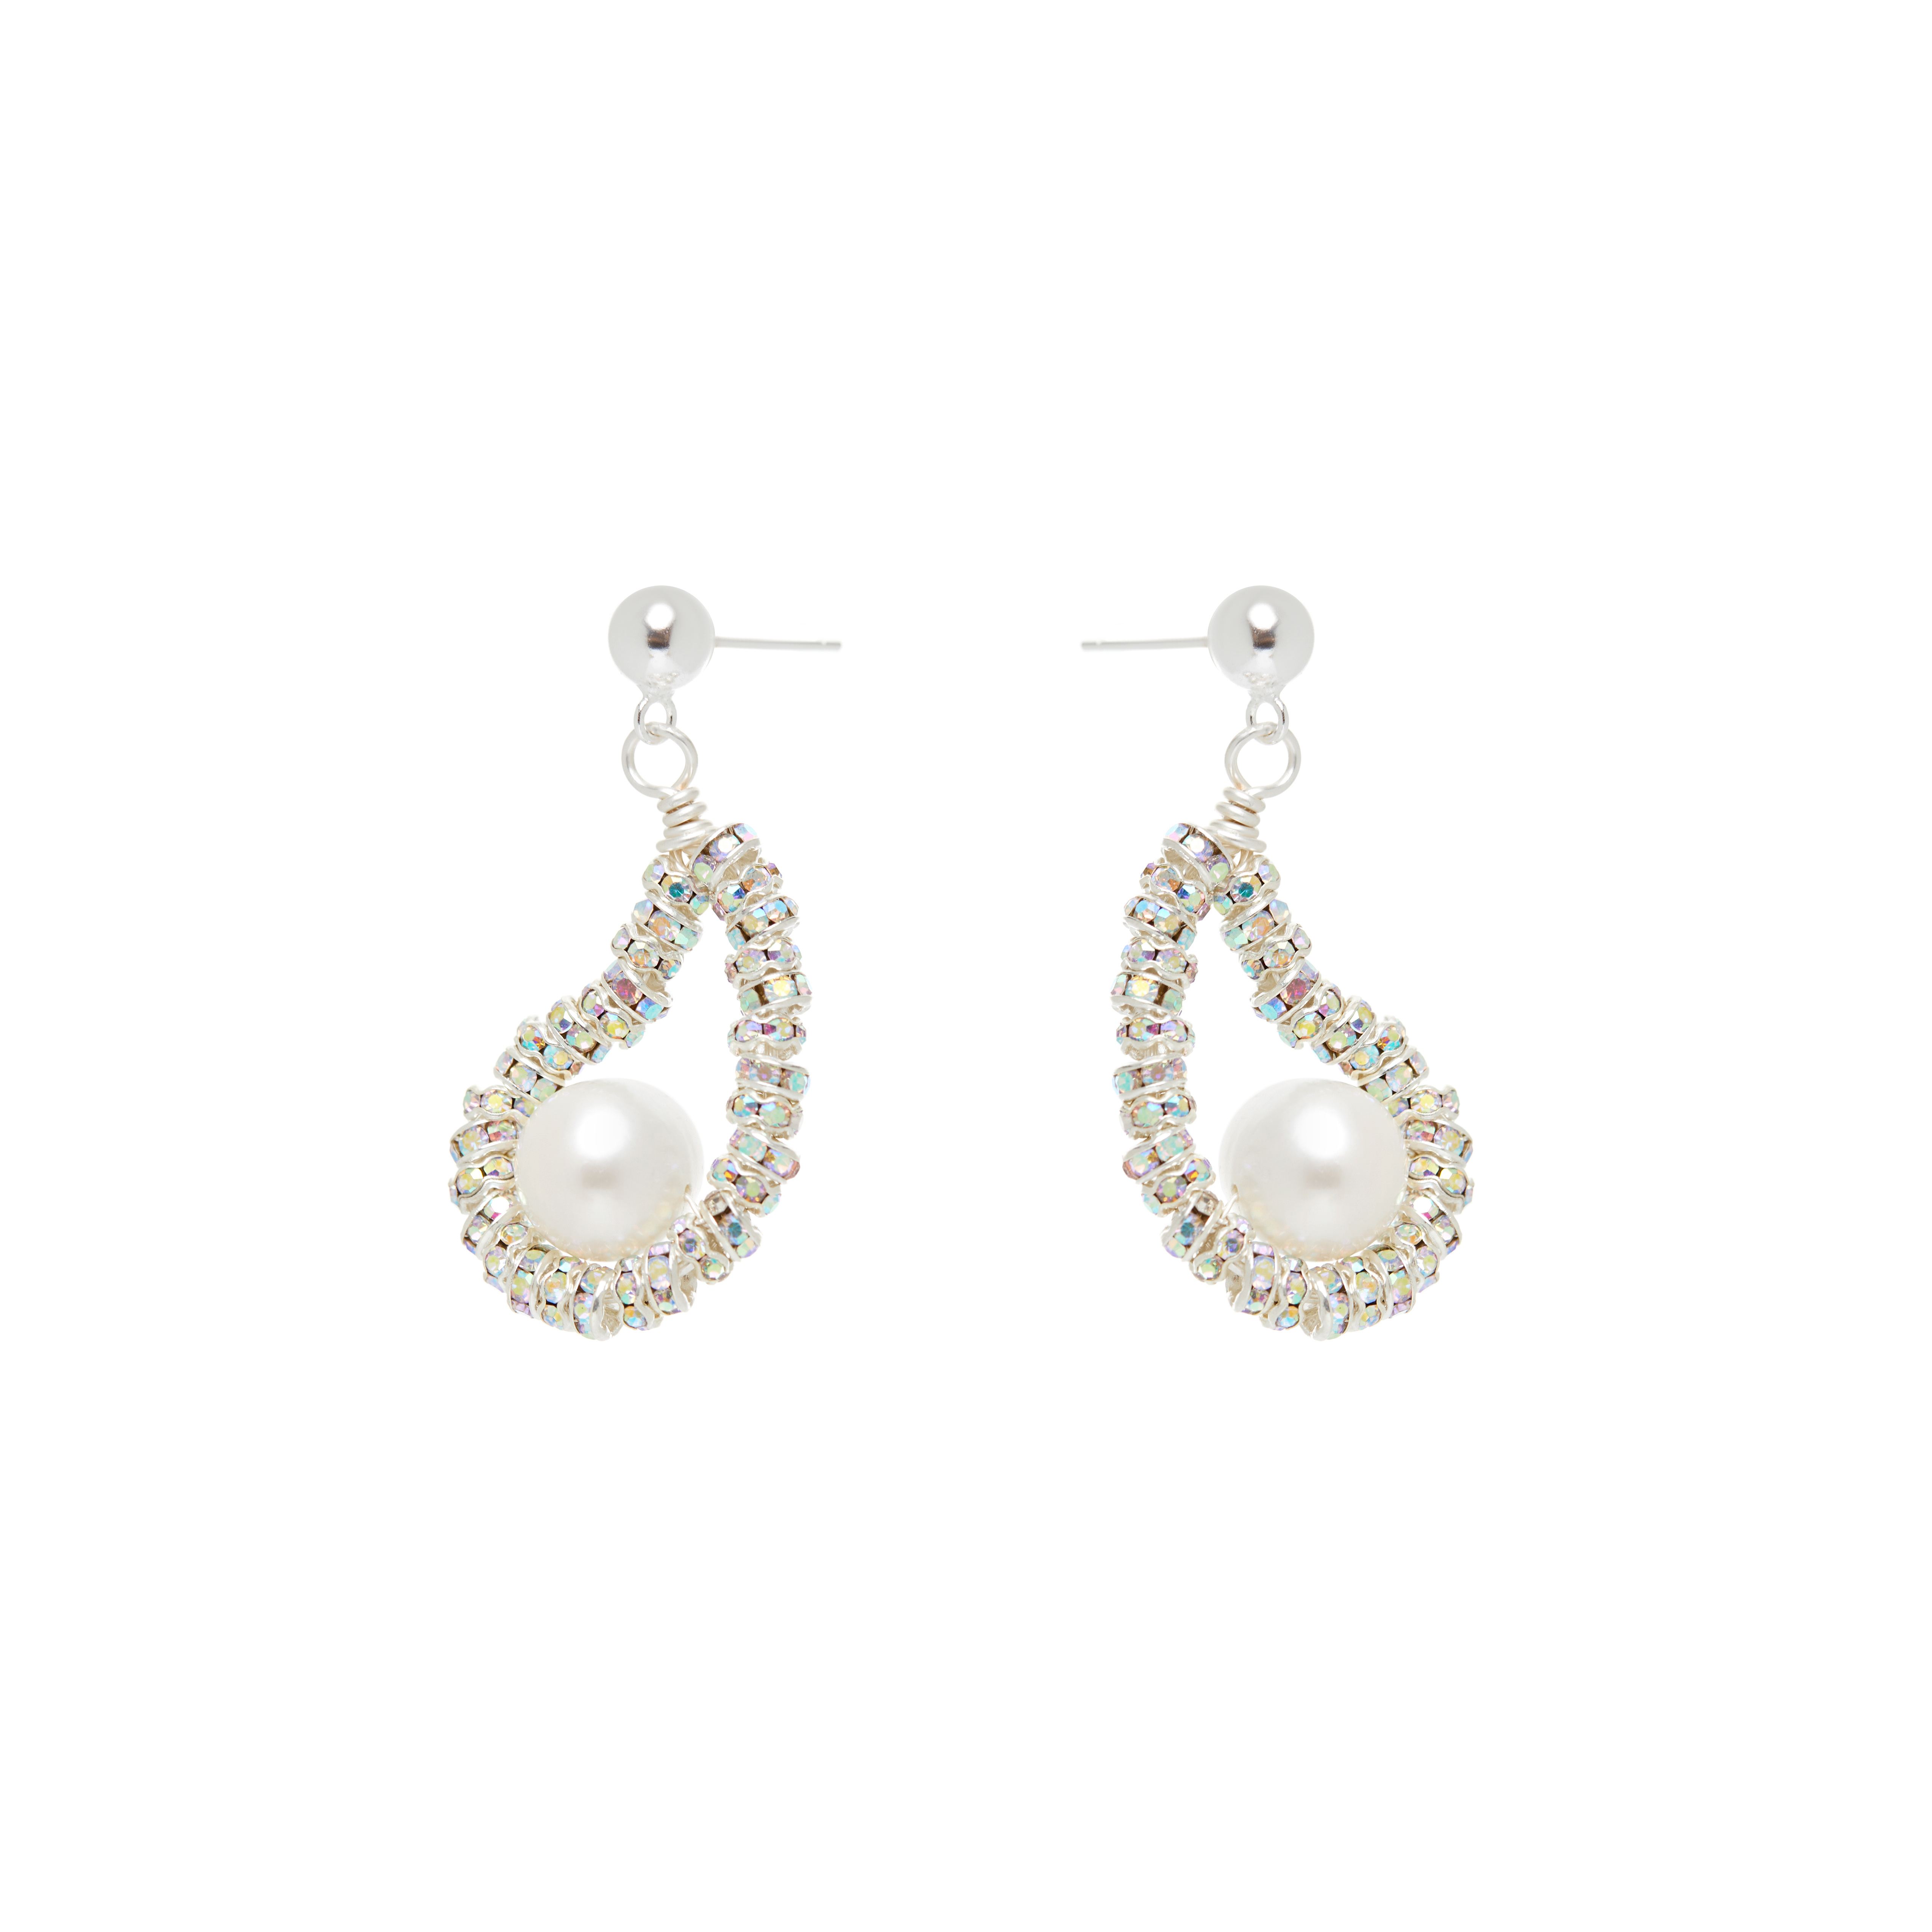 PEARL OCTOPUSS.Y Серьги Tiny Silver Oysters Earring тачскрин для планшета oysters t72hri 3g